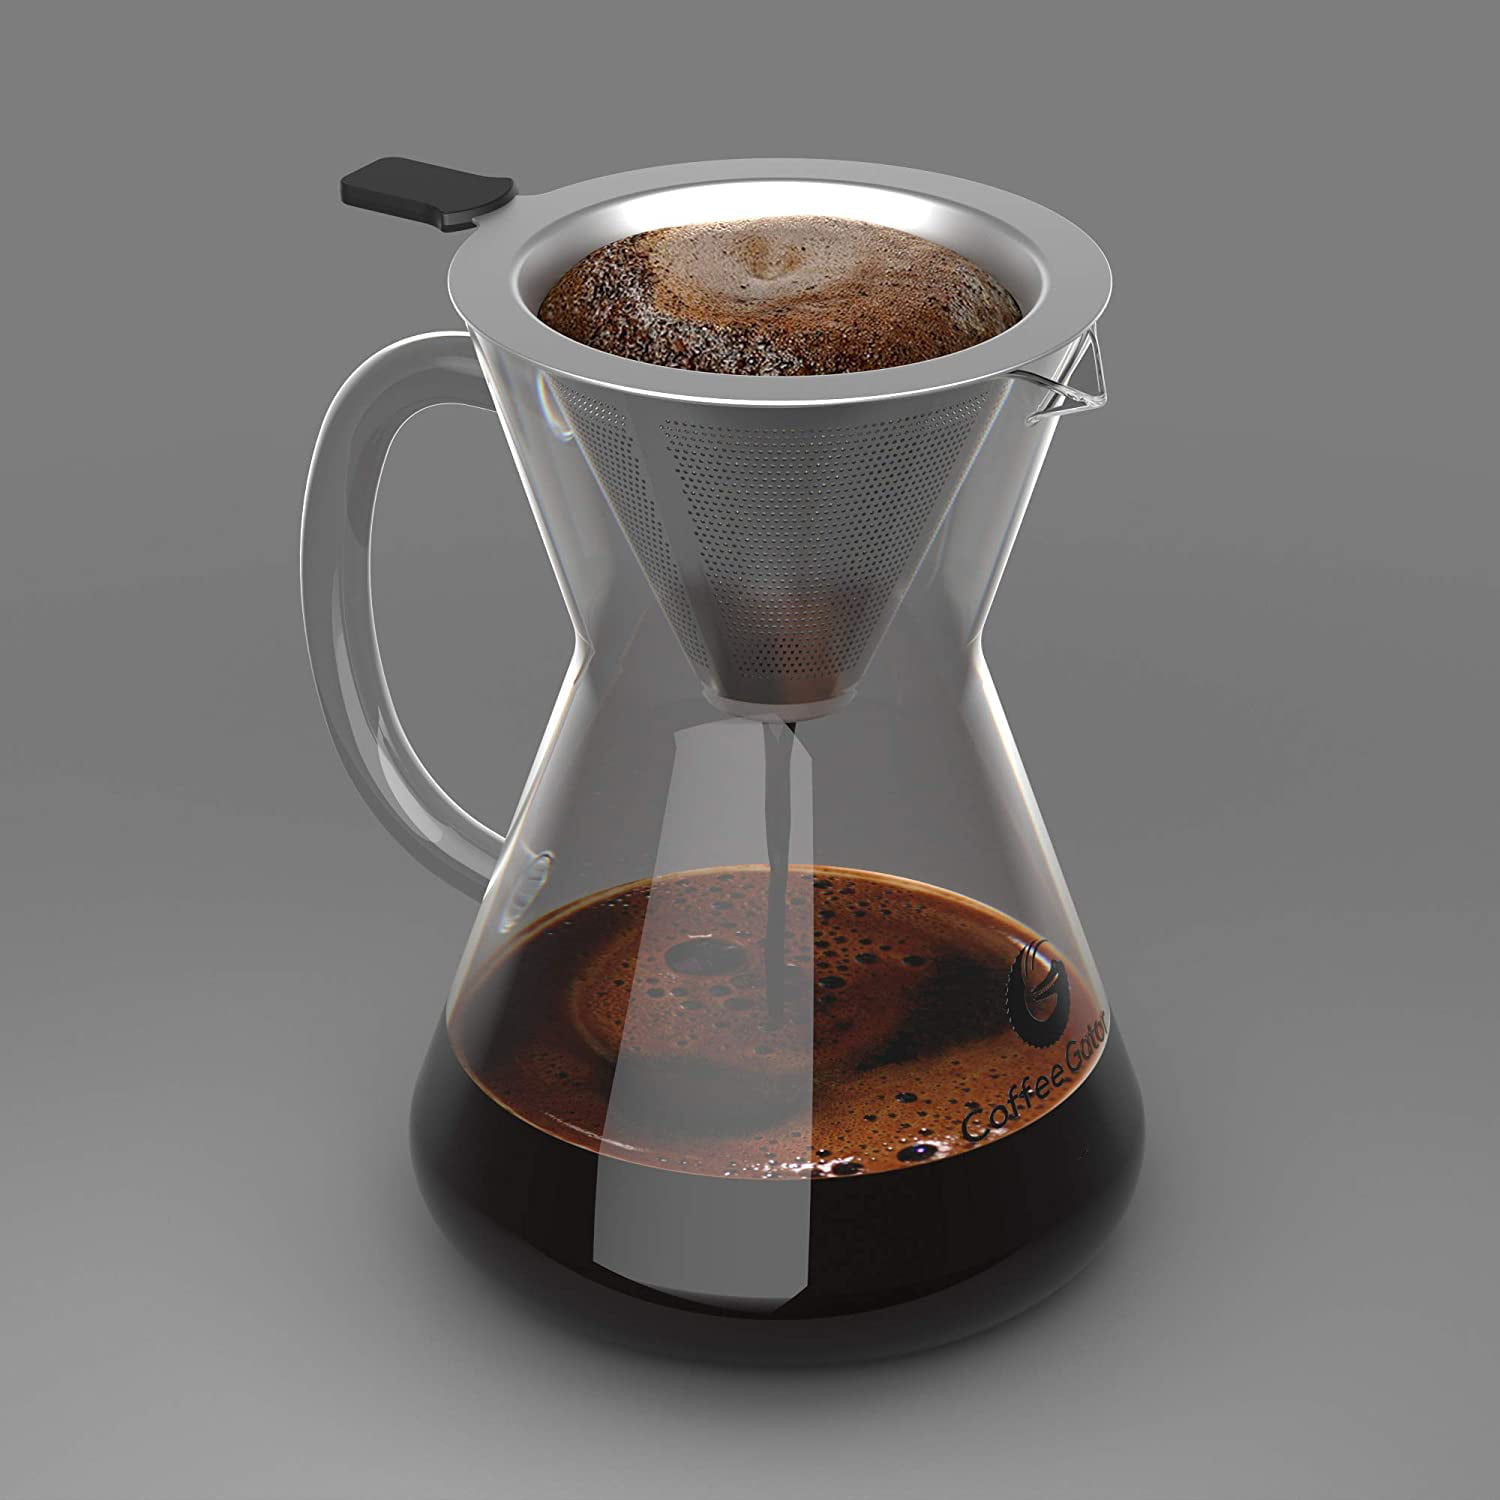 Pour Over Coffee Maker - Great Coffee Made Simple - Coffee Gator 